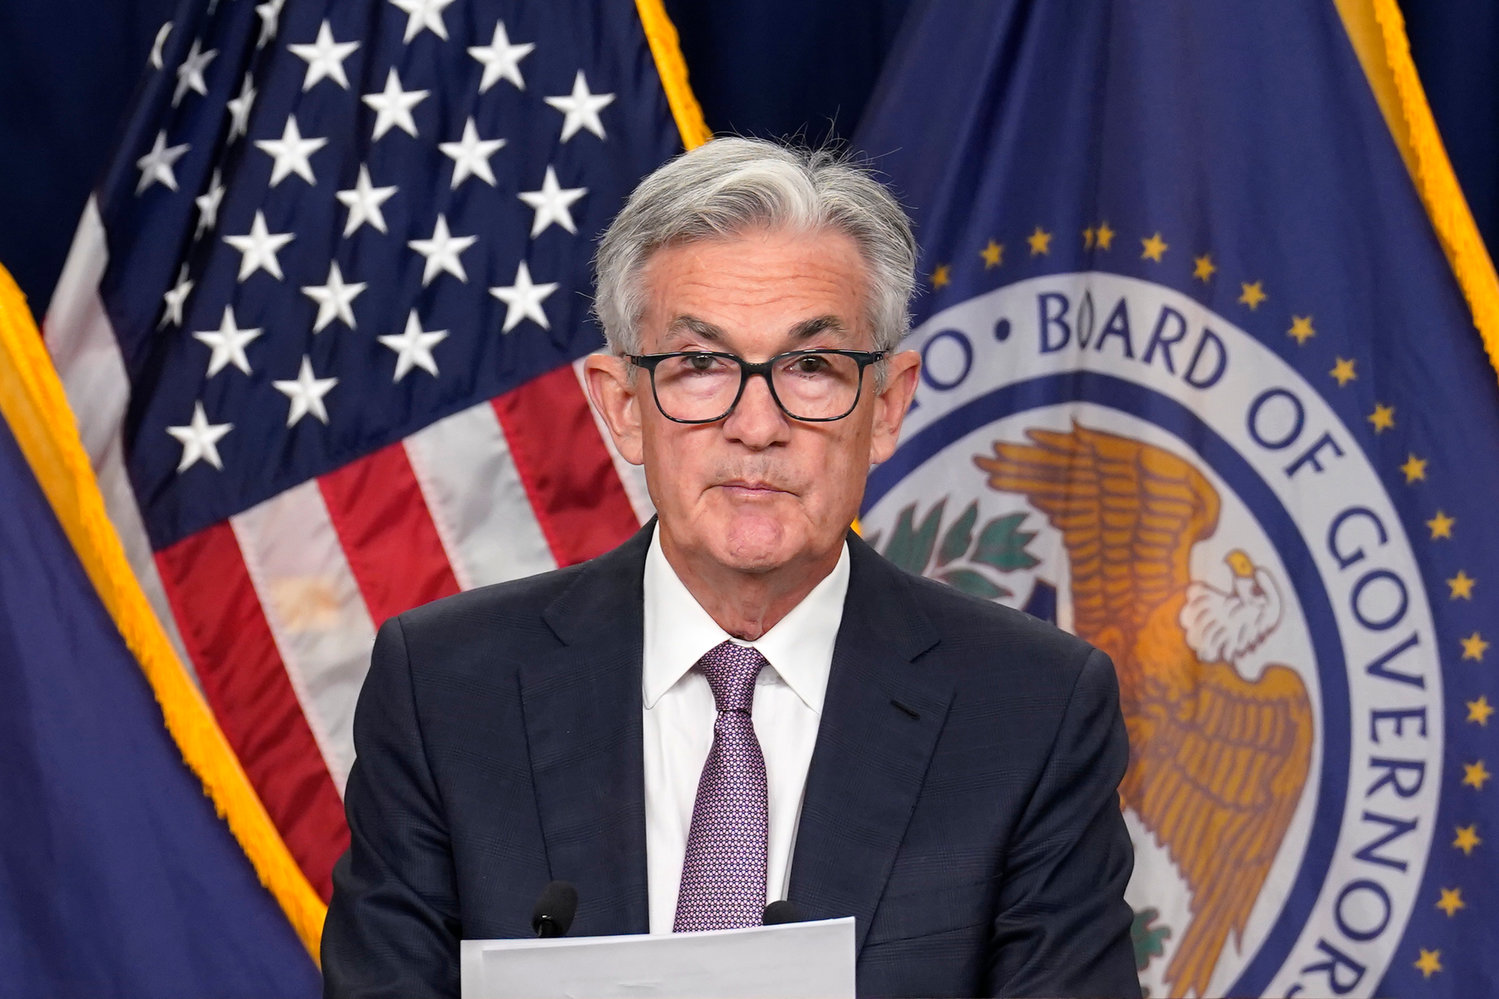 Federal Reserve Chairman Jerome Powell speaks at a press conference following the conclusion of the Federal Open Market Committee meeting and a 0.75 percent increase in the federal funds rate in Washington, D.C., on Wednesday, Sept. 21, 2022. (Yuri Gripas/Abaca Press/TNS)